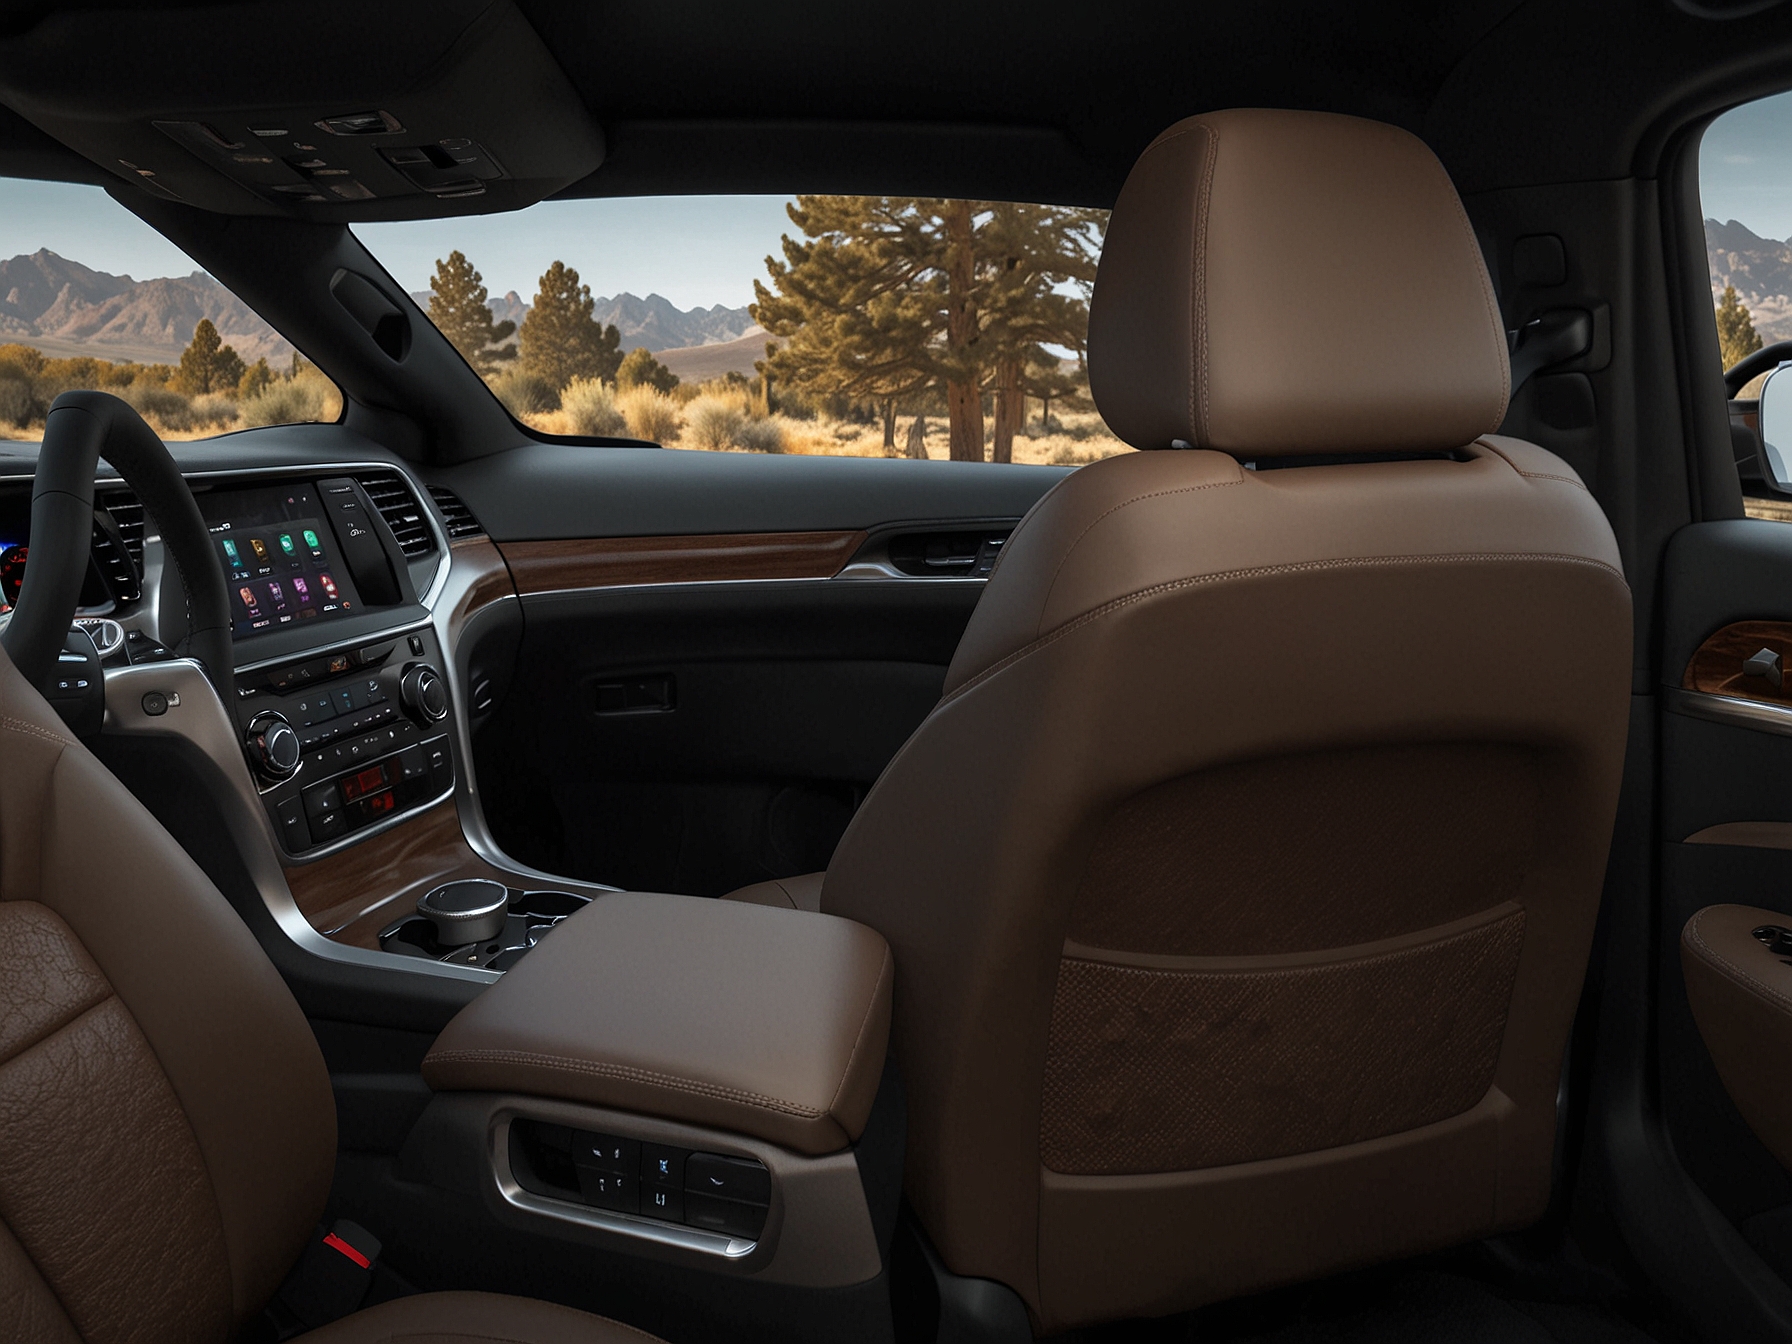 The interior of the 2024 Jeep Grand Cherokee offers a luxurious cabin with Nappa leather seats, open-pore wood trim, and advanced tech features including a large touchscreen, Apple CarPlay, Android Auto, and a digital instrument cluster.